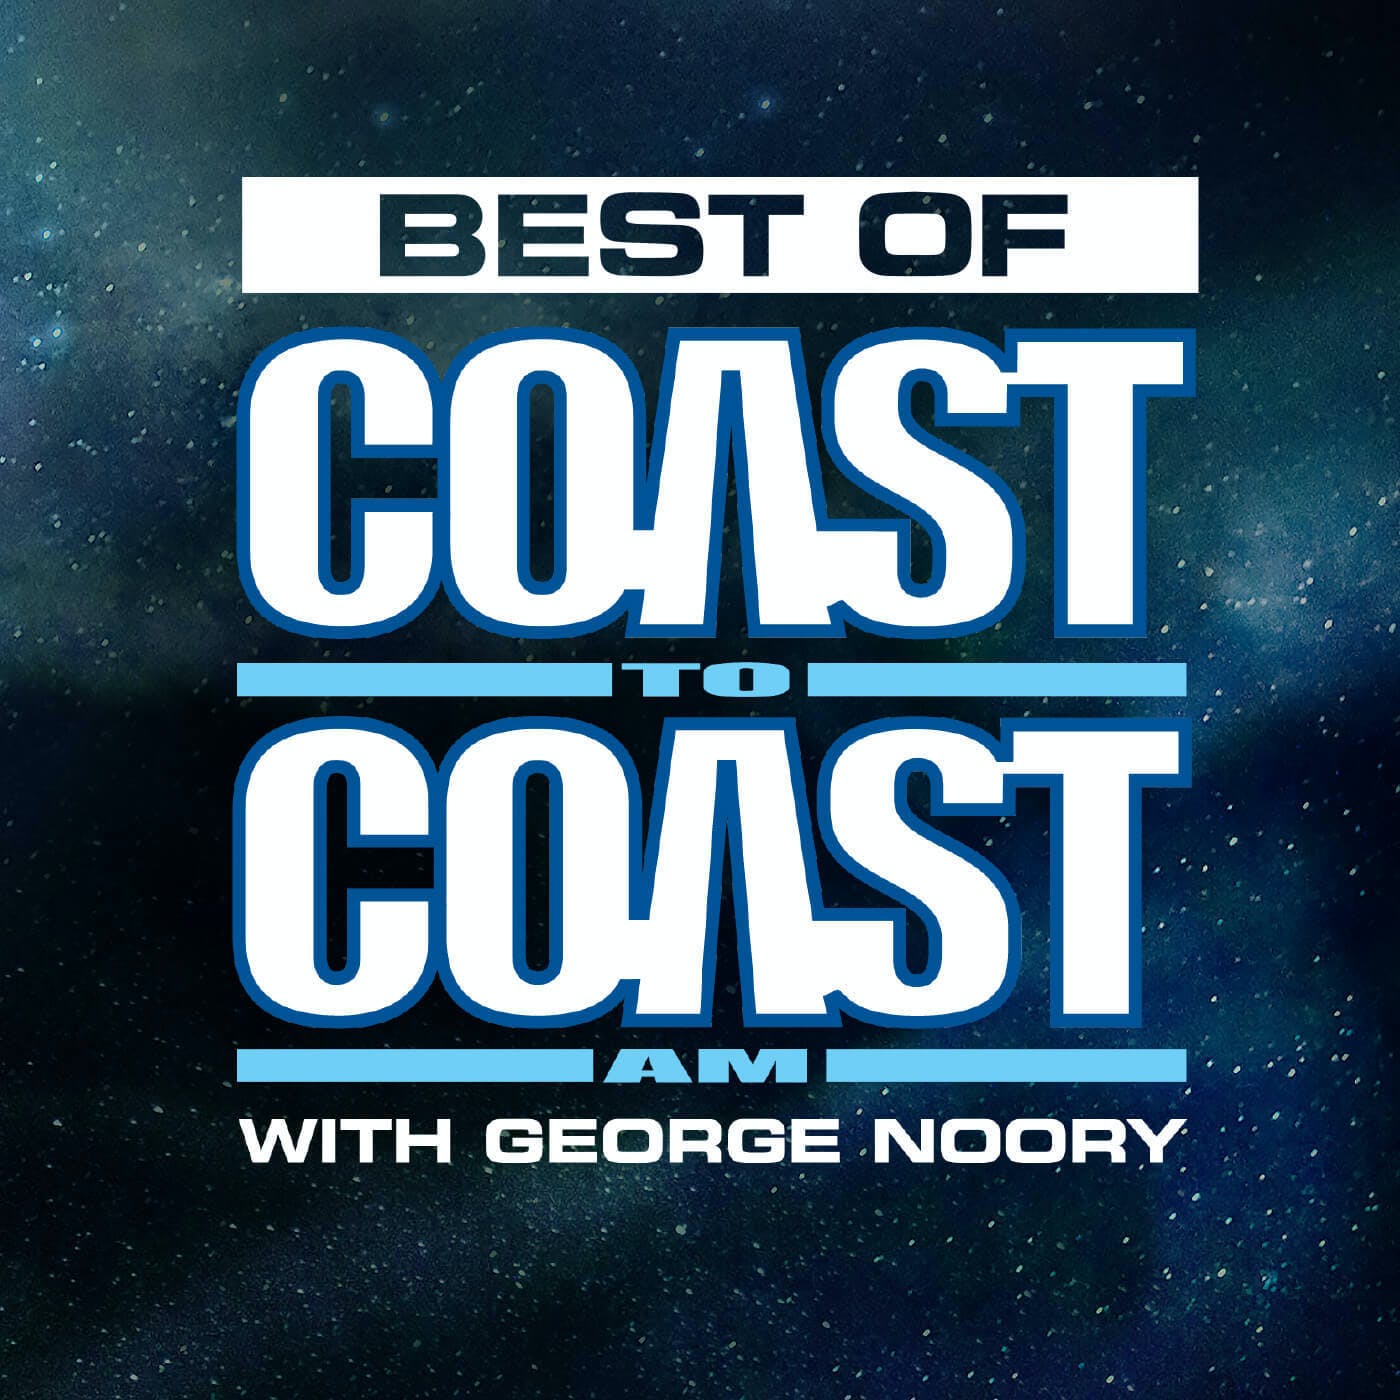 Near Death Experiences and Angels - Best of Coast to Coast AM - 7/7/20